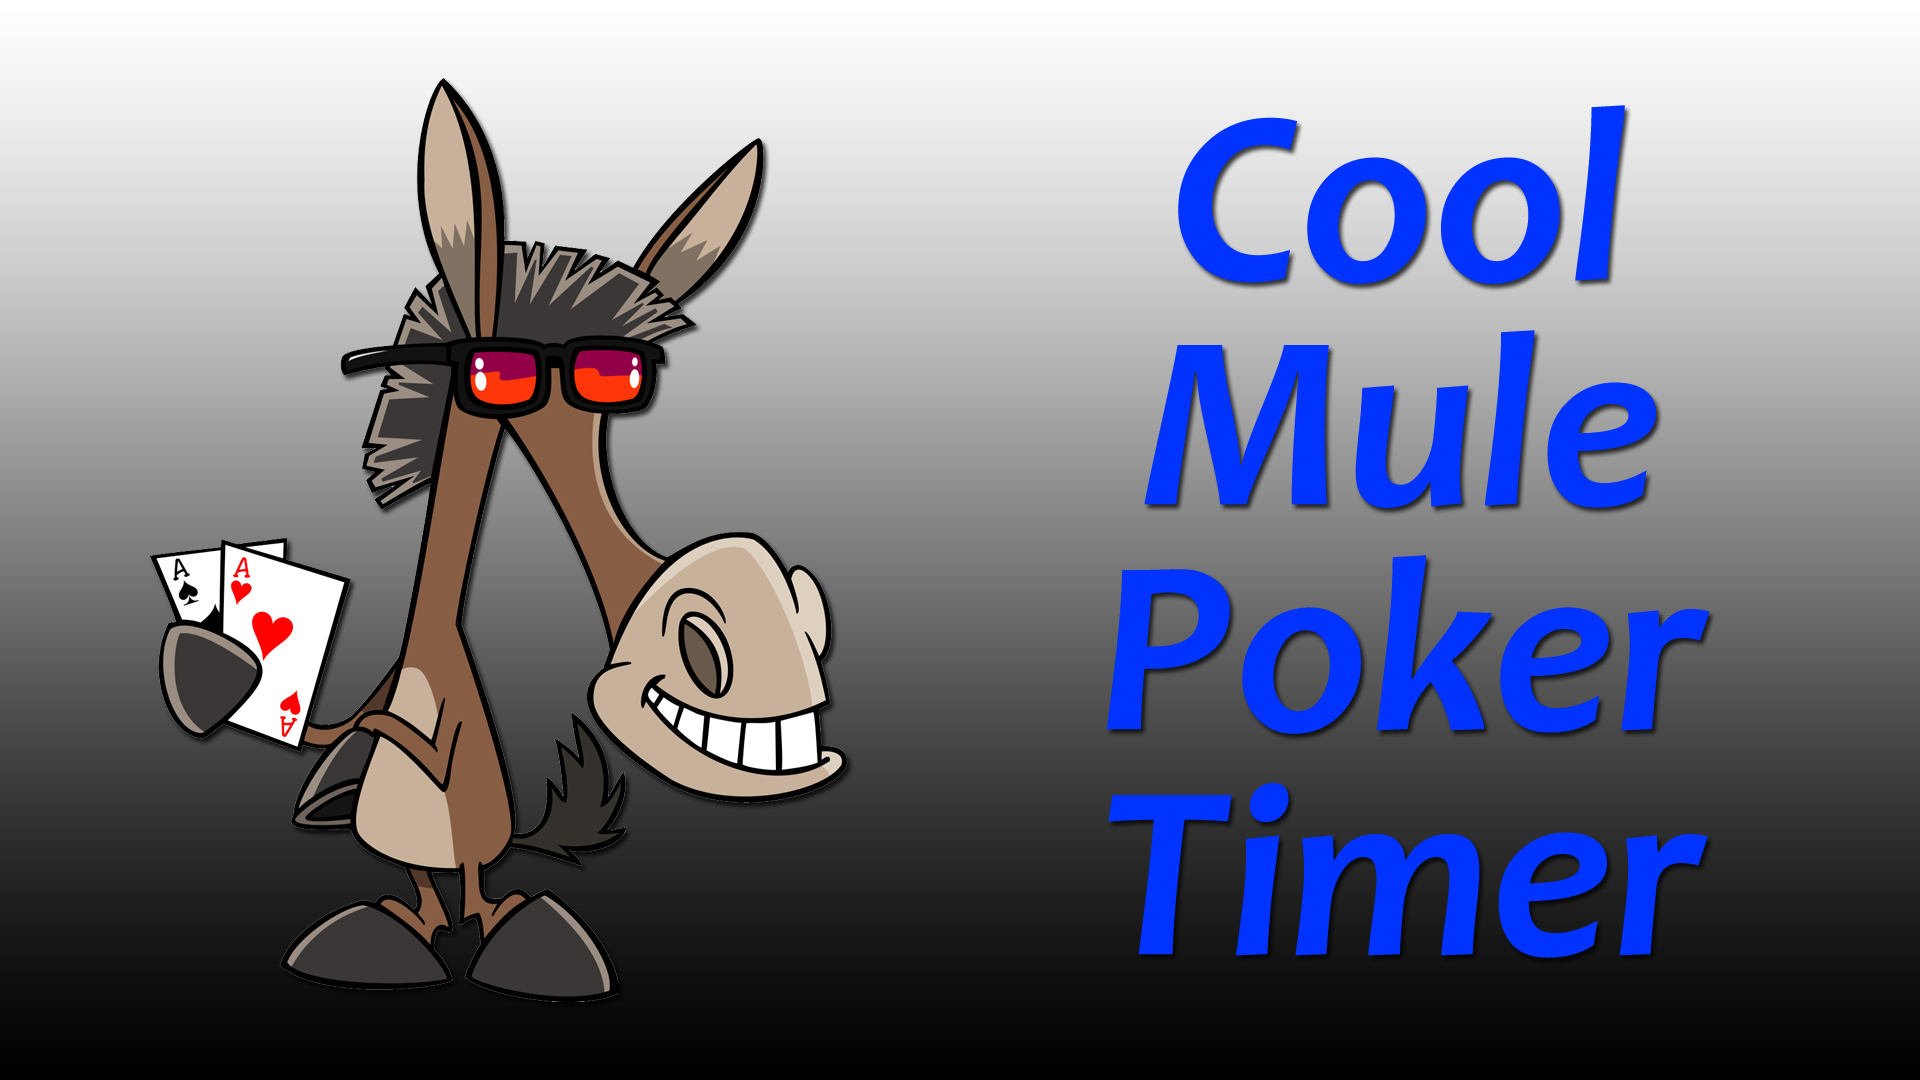 Cool Mule Timer